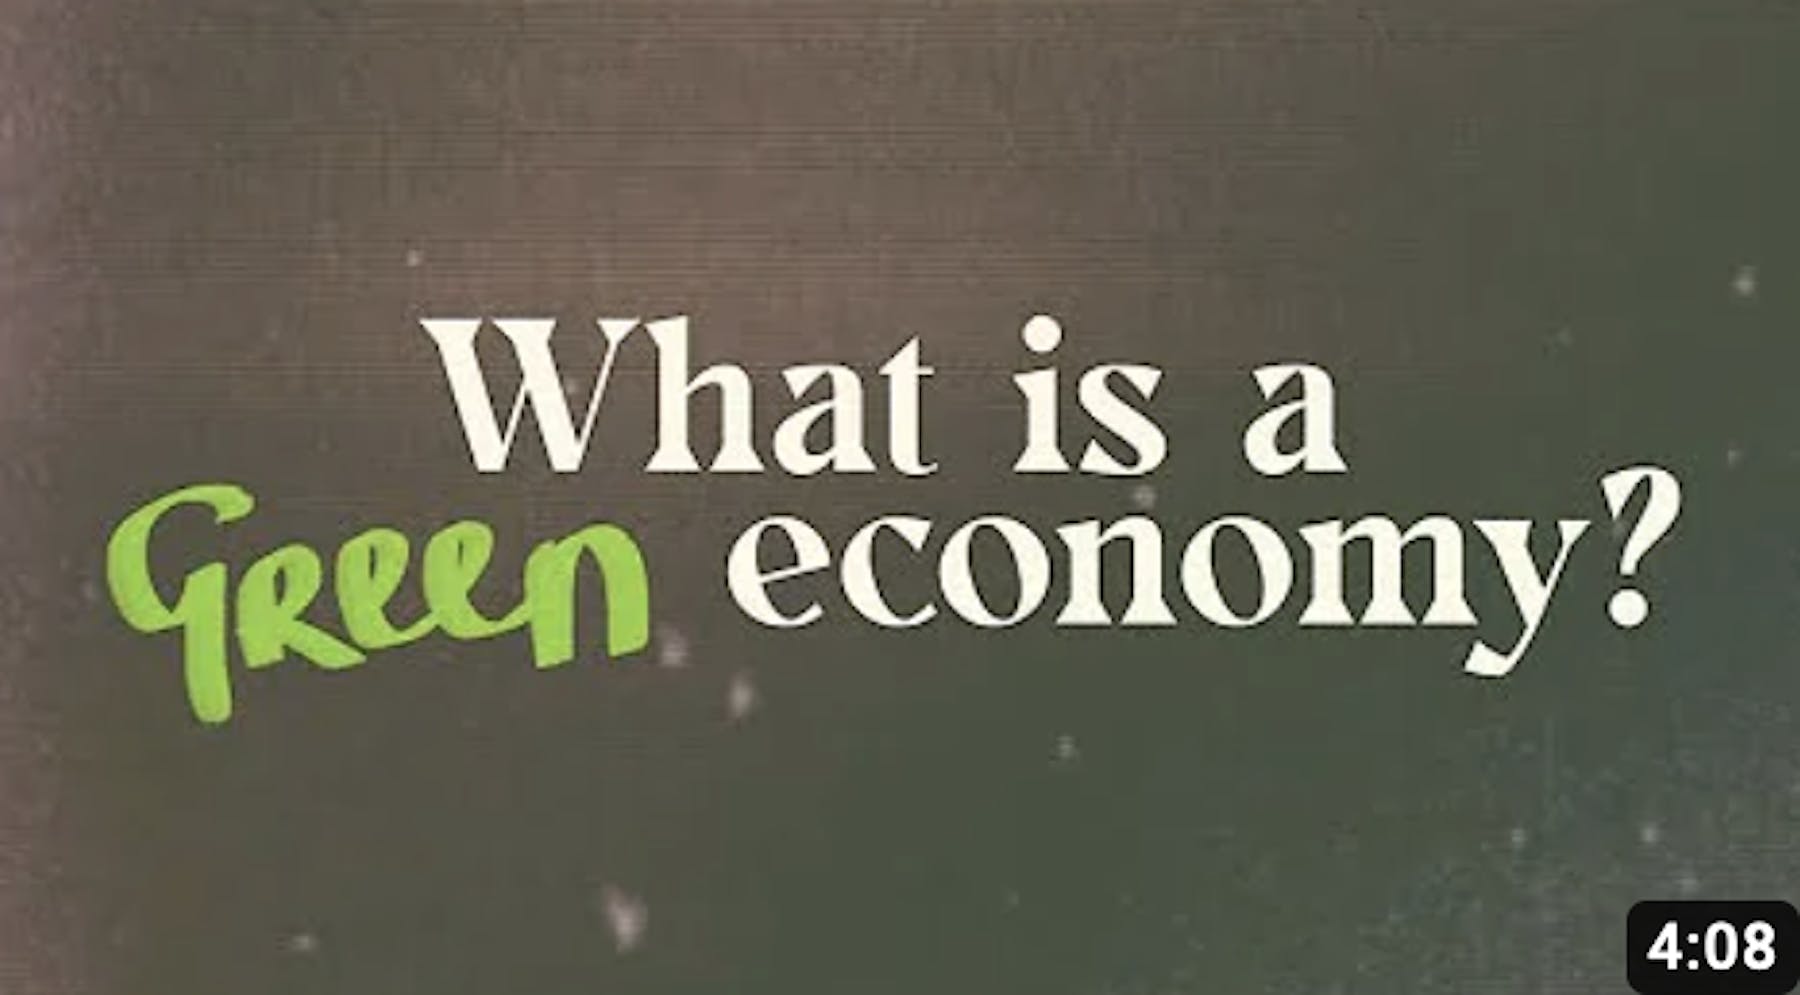 title - what is a green economy?